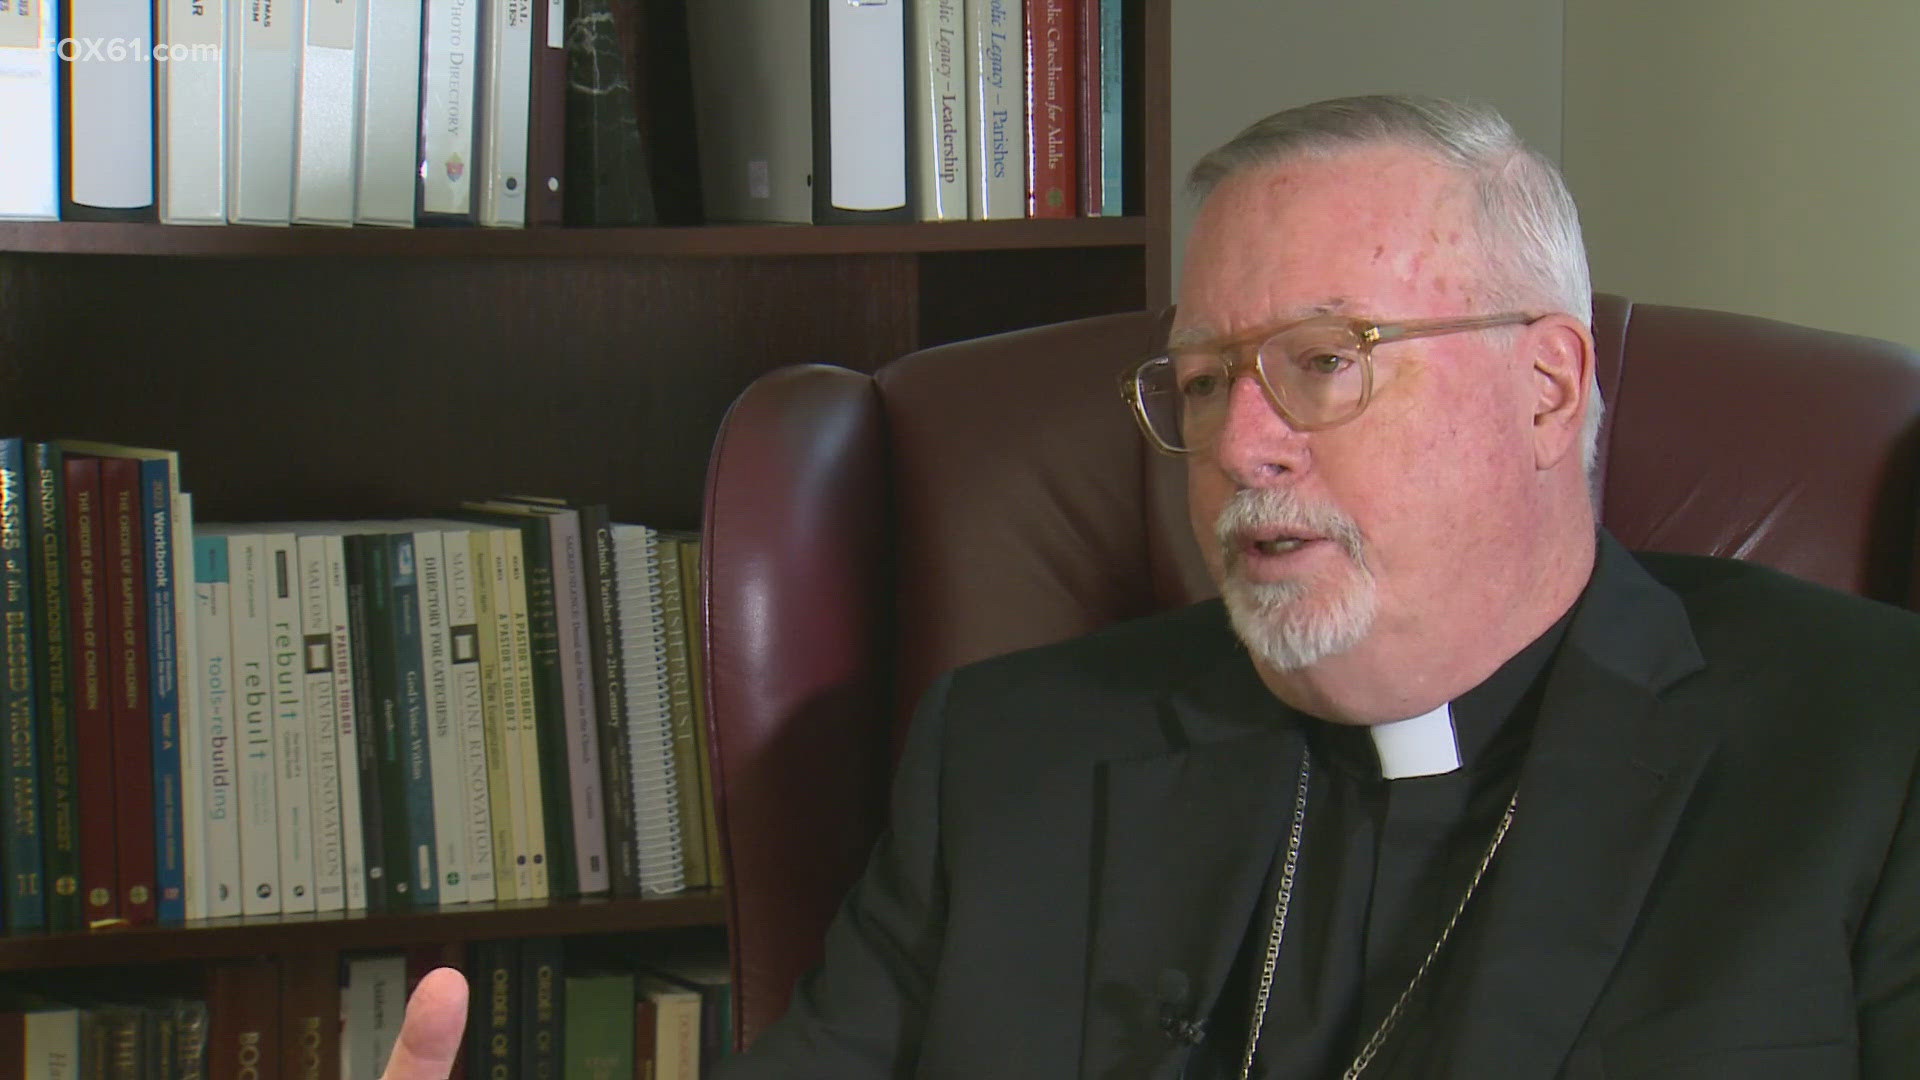 Archbishop Coyne will lead an archdiocese that consists of 400,000 Catholics, 157 priests and 115 parishes.